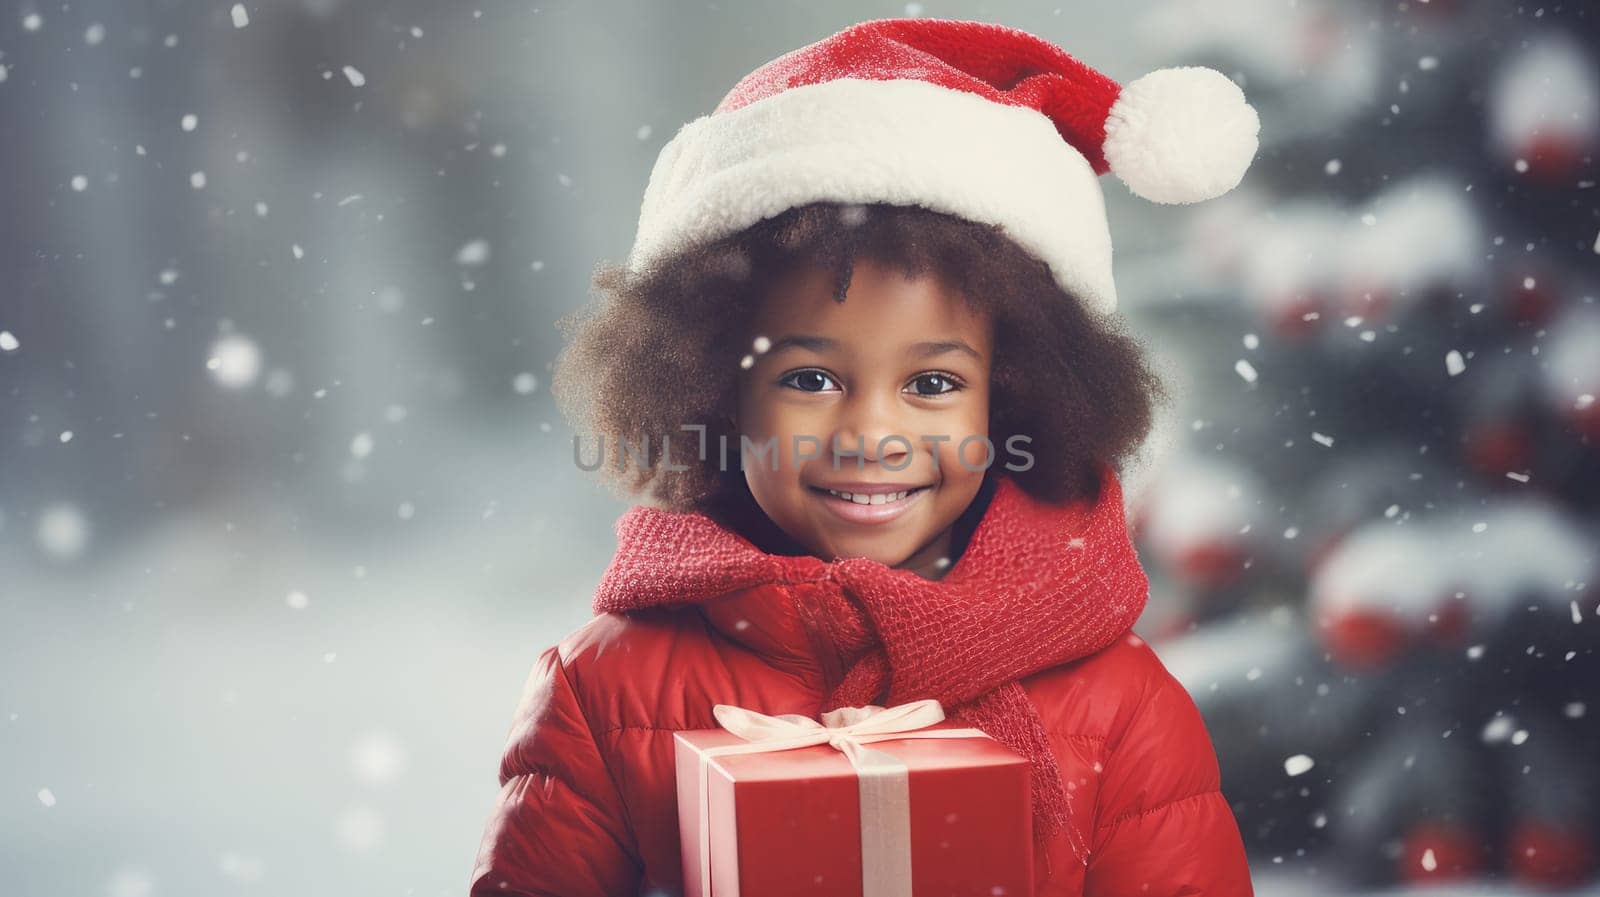 Pretty smiling African American girl, child in red jacket and hat holding Christmas gifts while standing against background of decorated Christmas tree outdoors on snowy day of winter holidays by Alla_Yurtayeva